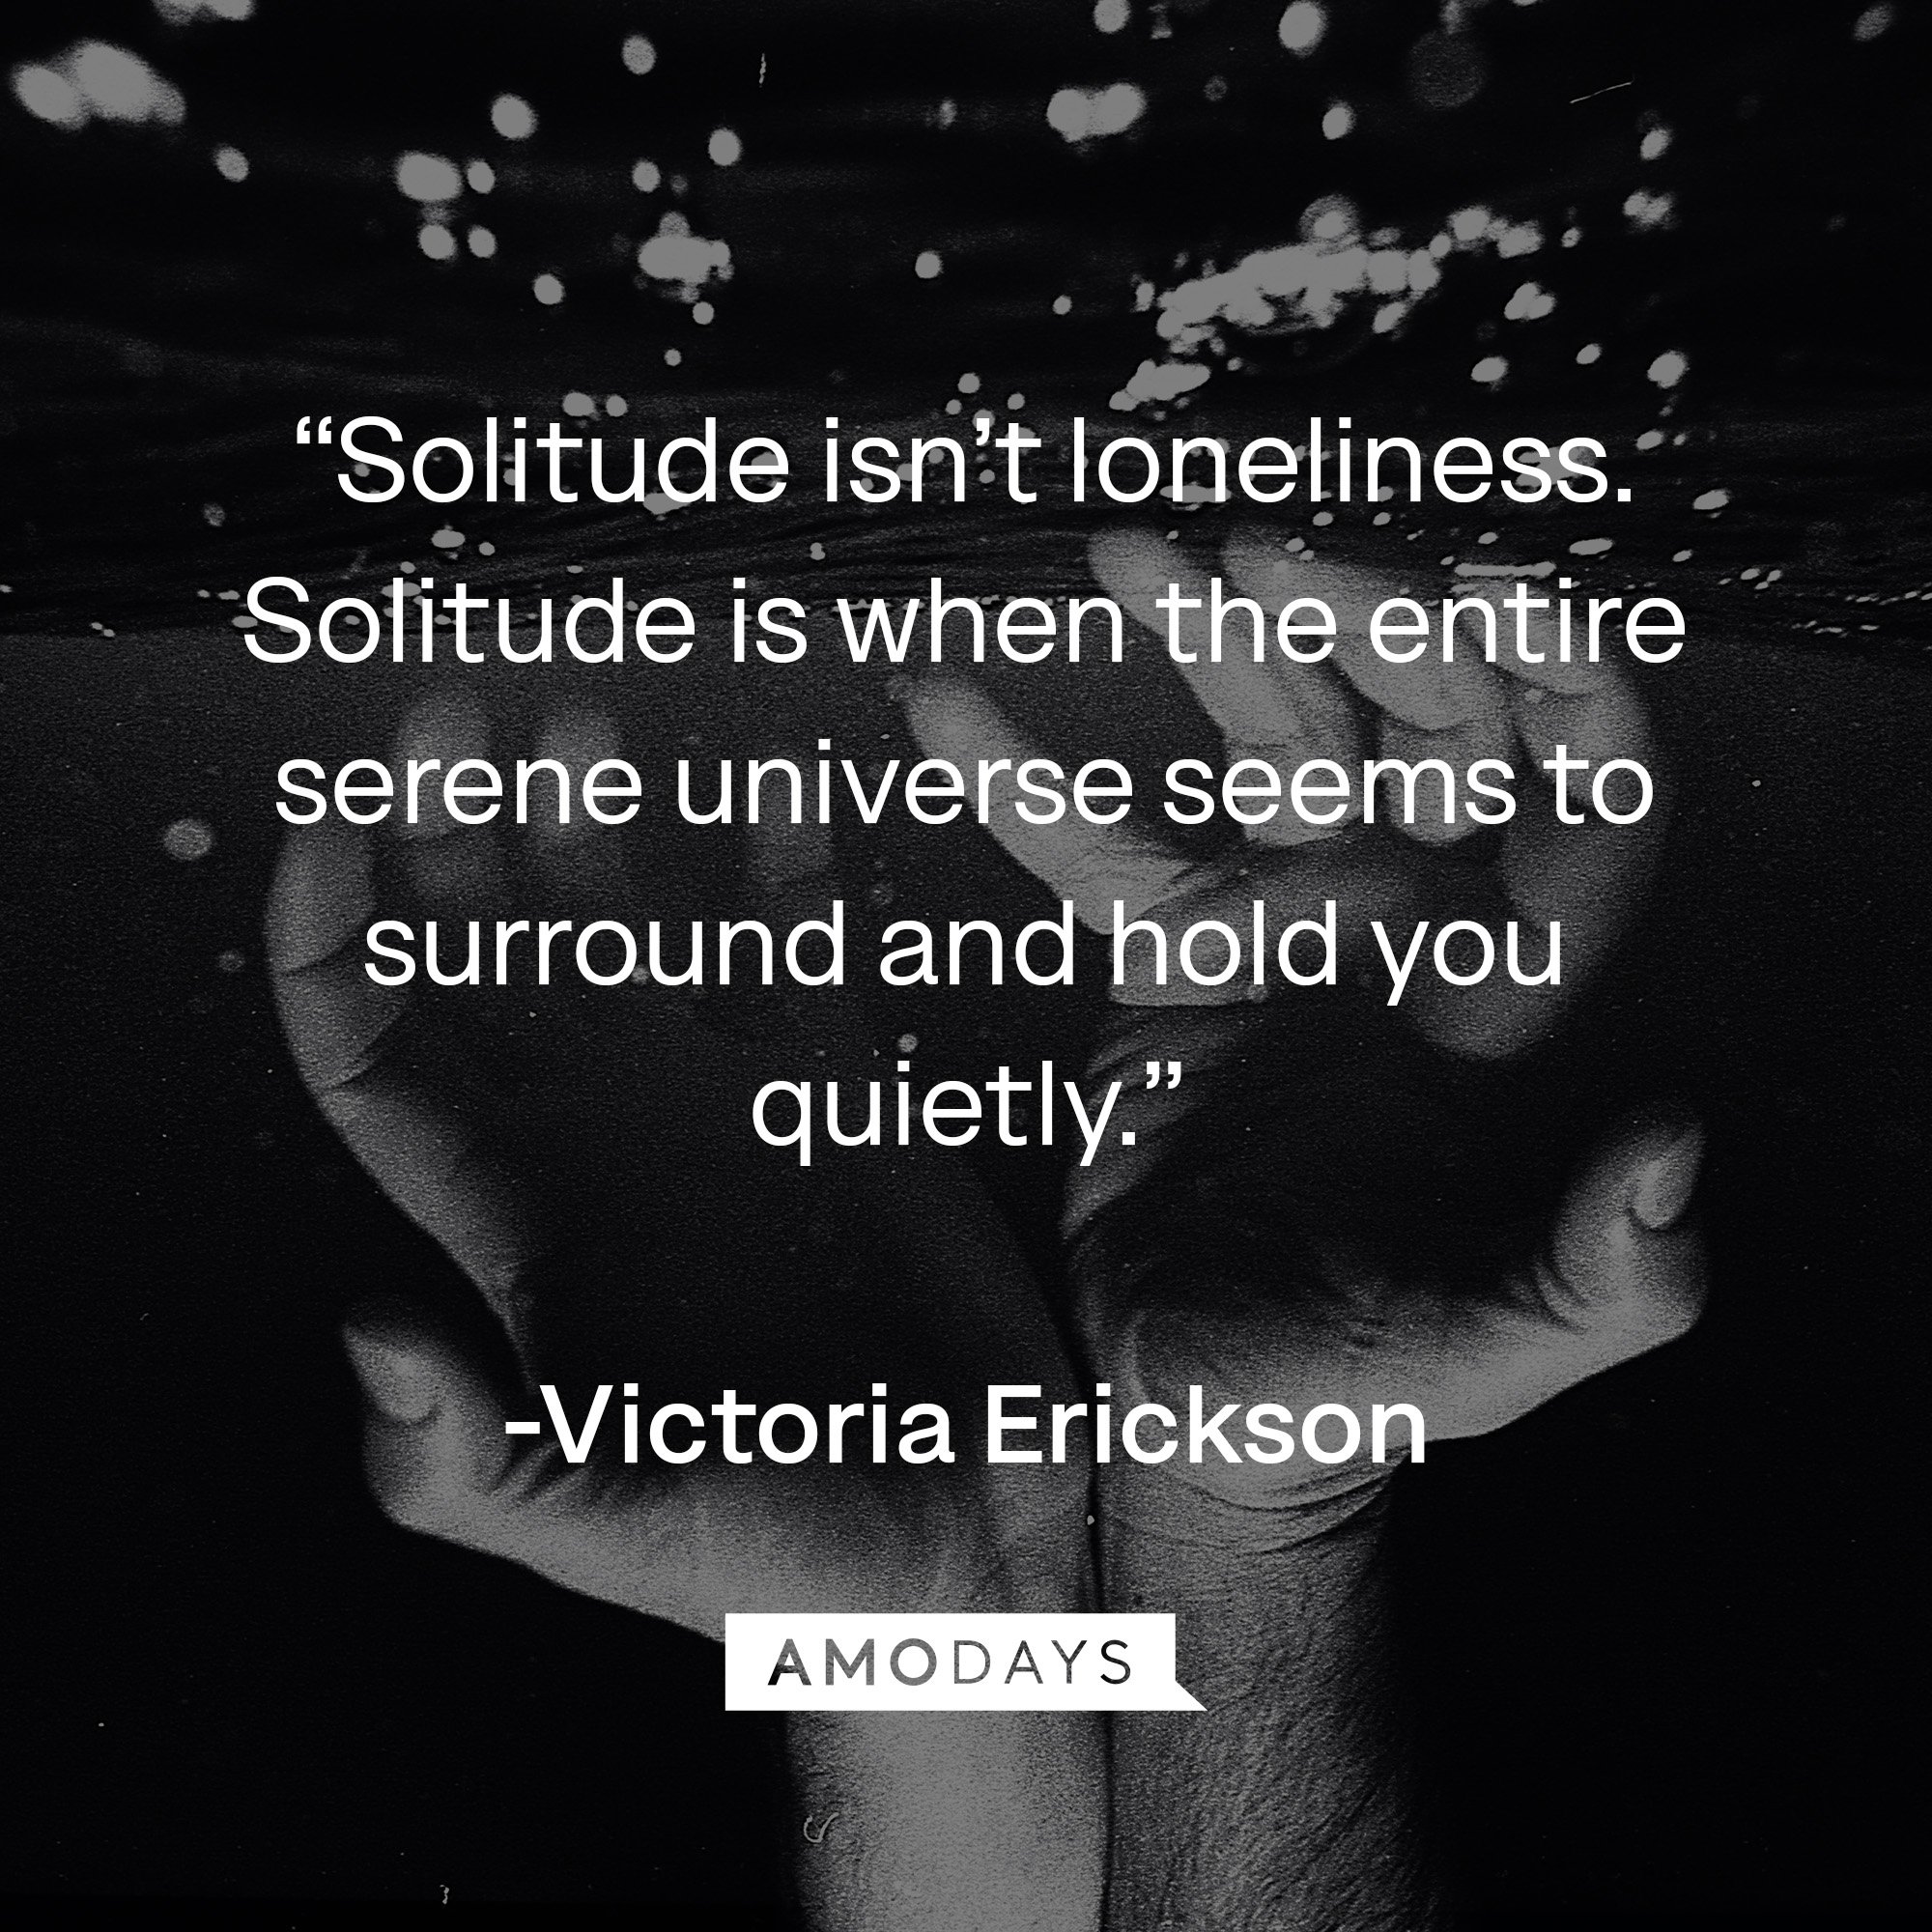  Victoria Erickson’s quote: “Solitude isn’t loneliness. Solitude is when the entire serene universe seems to surround and hold you quietly.” | Image: Amodays